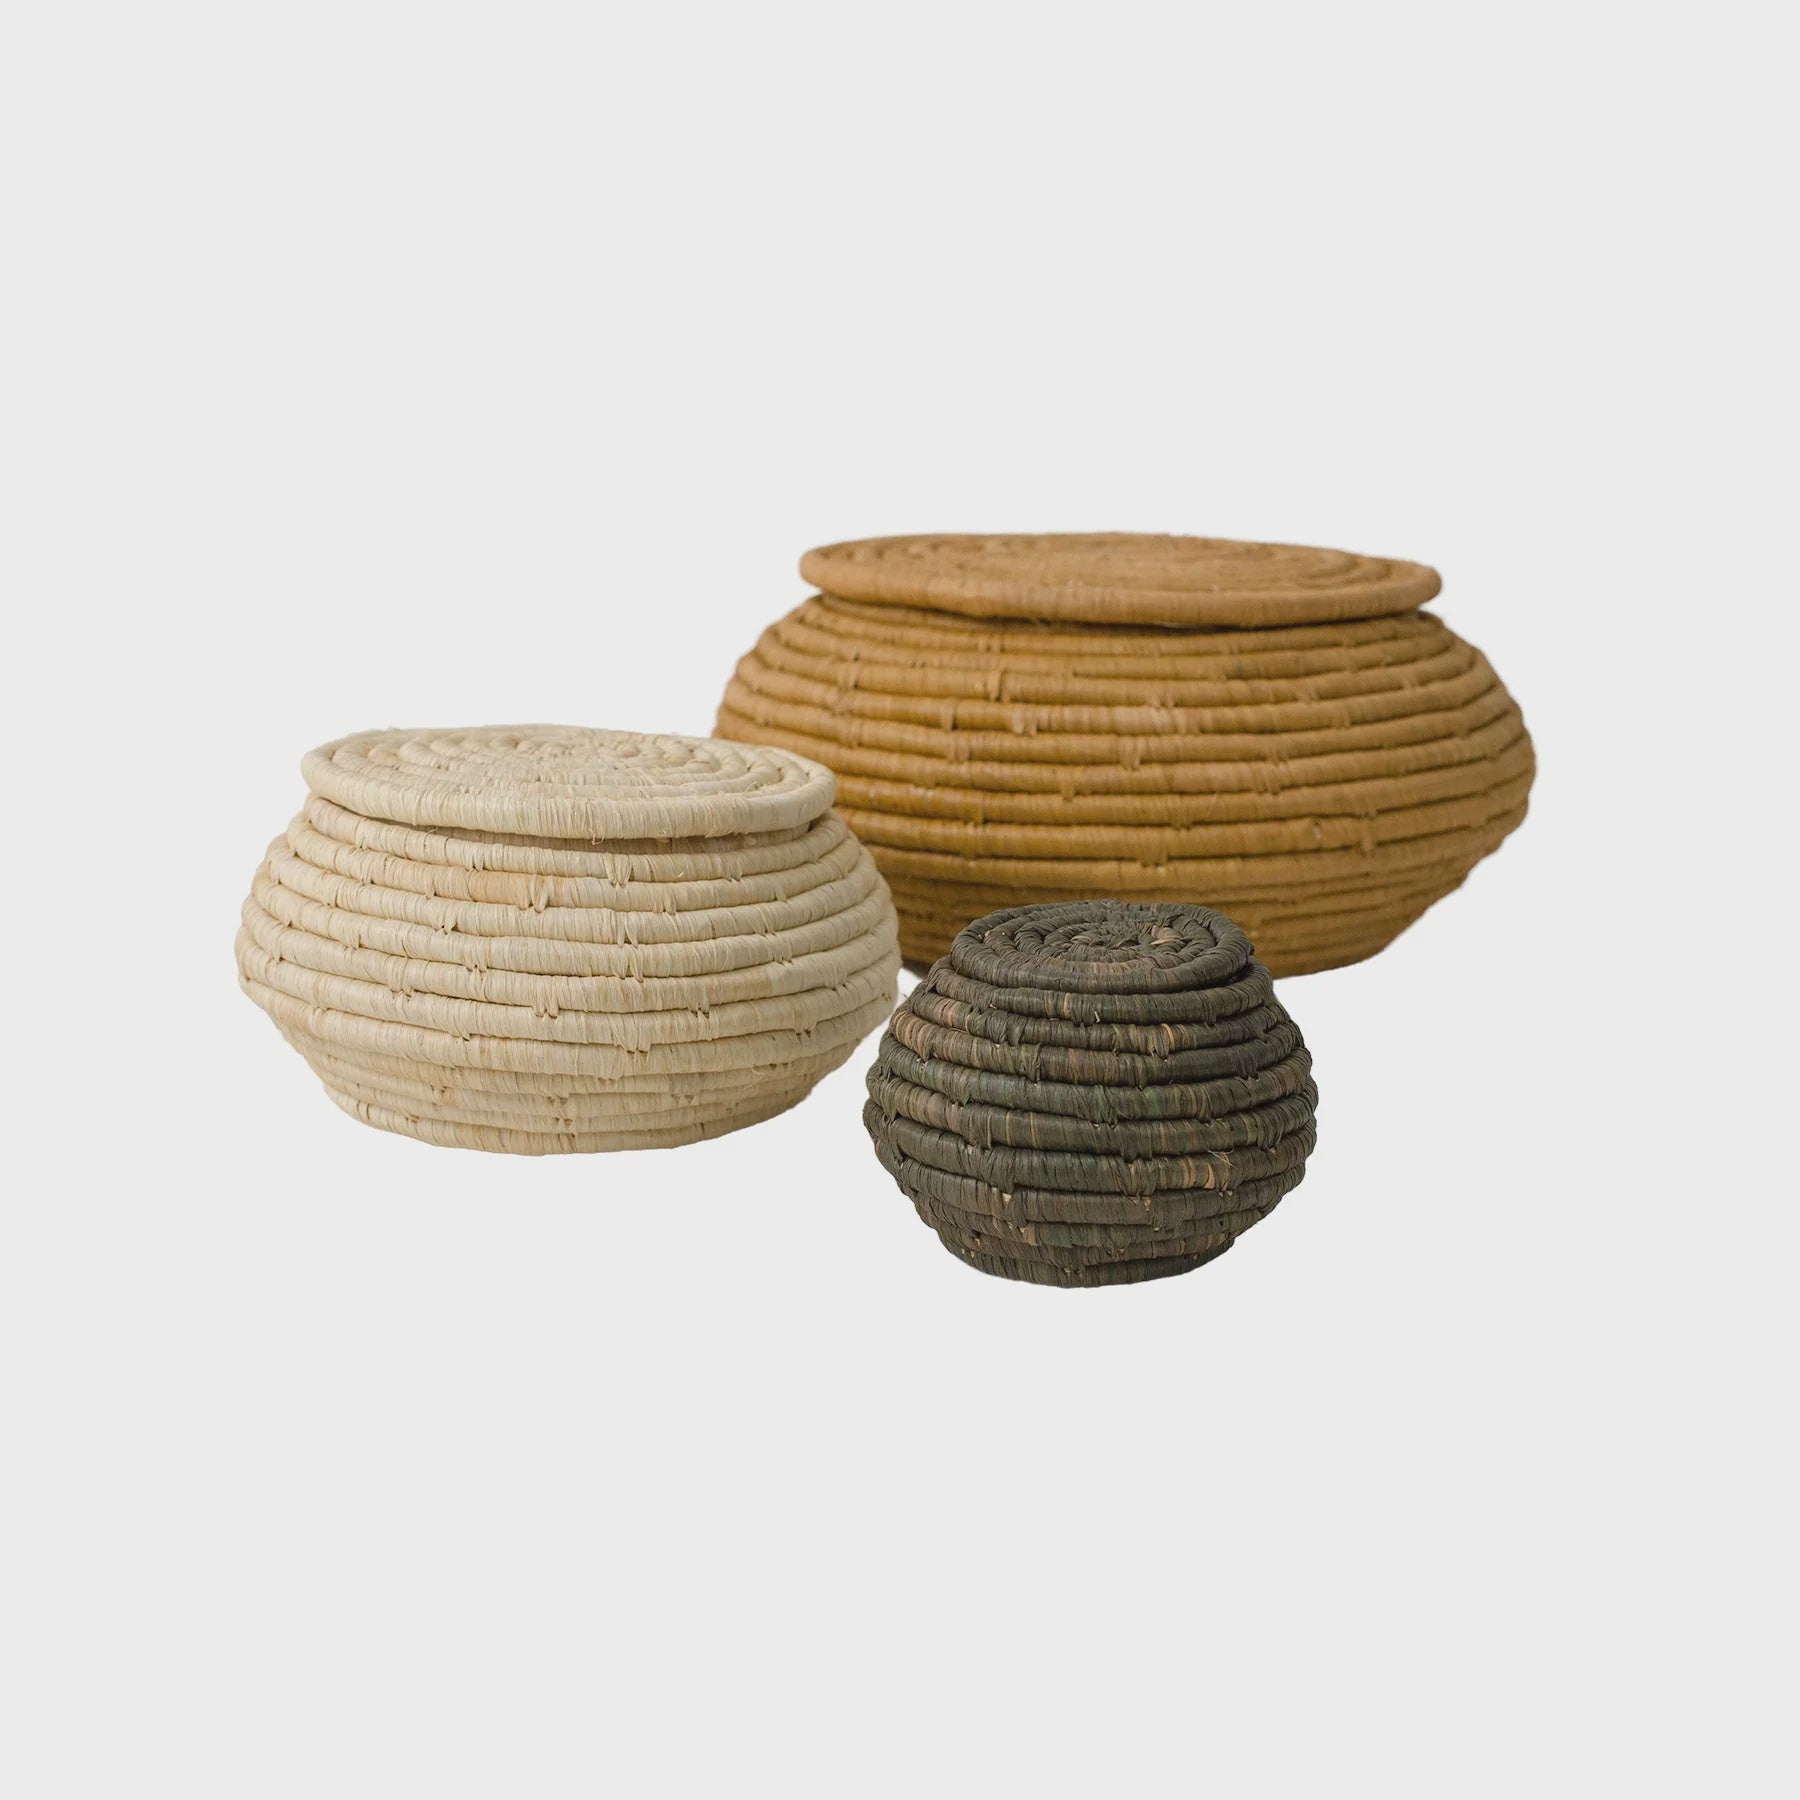 Three Town Square Lidded Woven Boxes of different sizes and colors, reminiscent of the crafts found in a Scottsdale, Arizona bungalow, are isolated on a white background. The boxes feature tightly woven designs, with the largest being light brown, the medium tan, and the smallest dark brown.